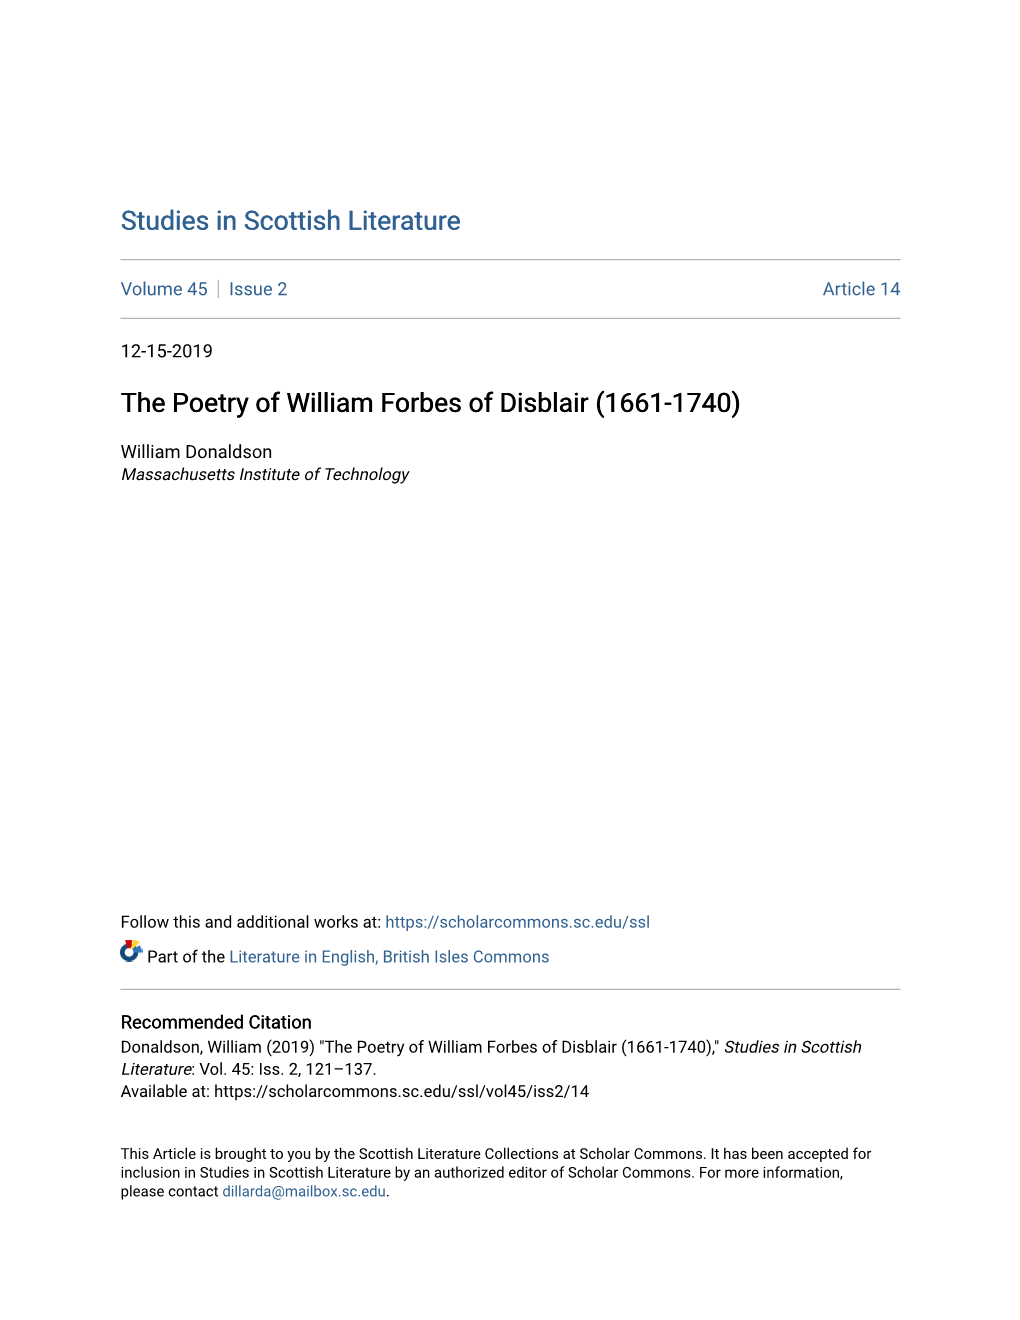 The Poetry of William Forbes of Disblair (1661-1740)